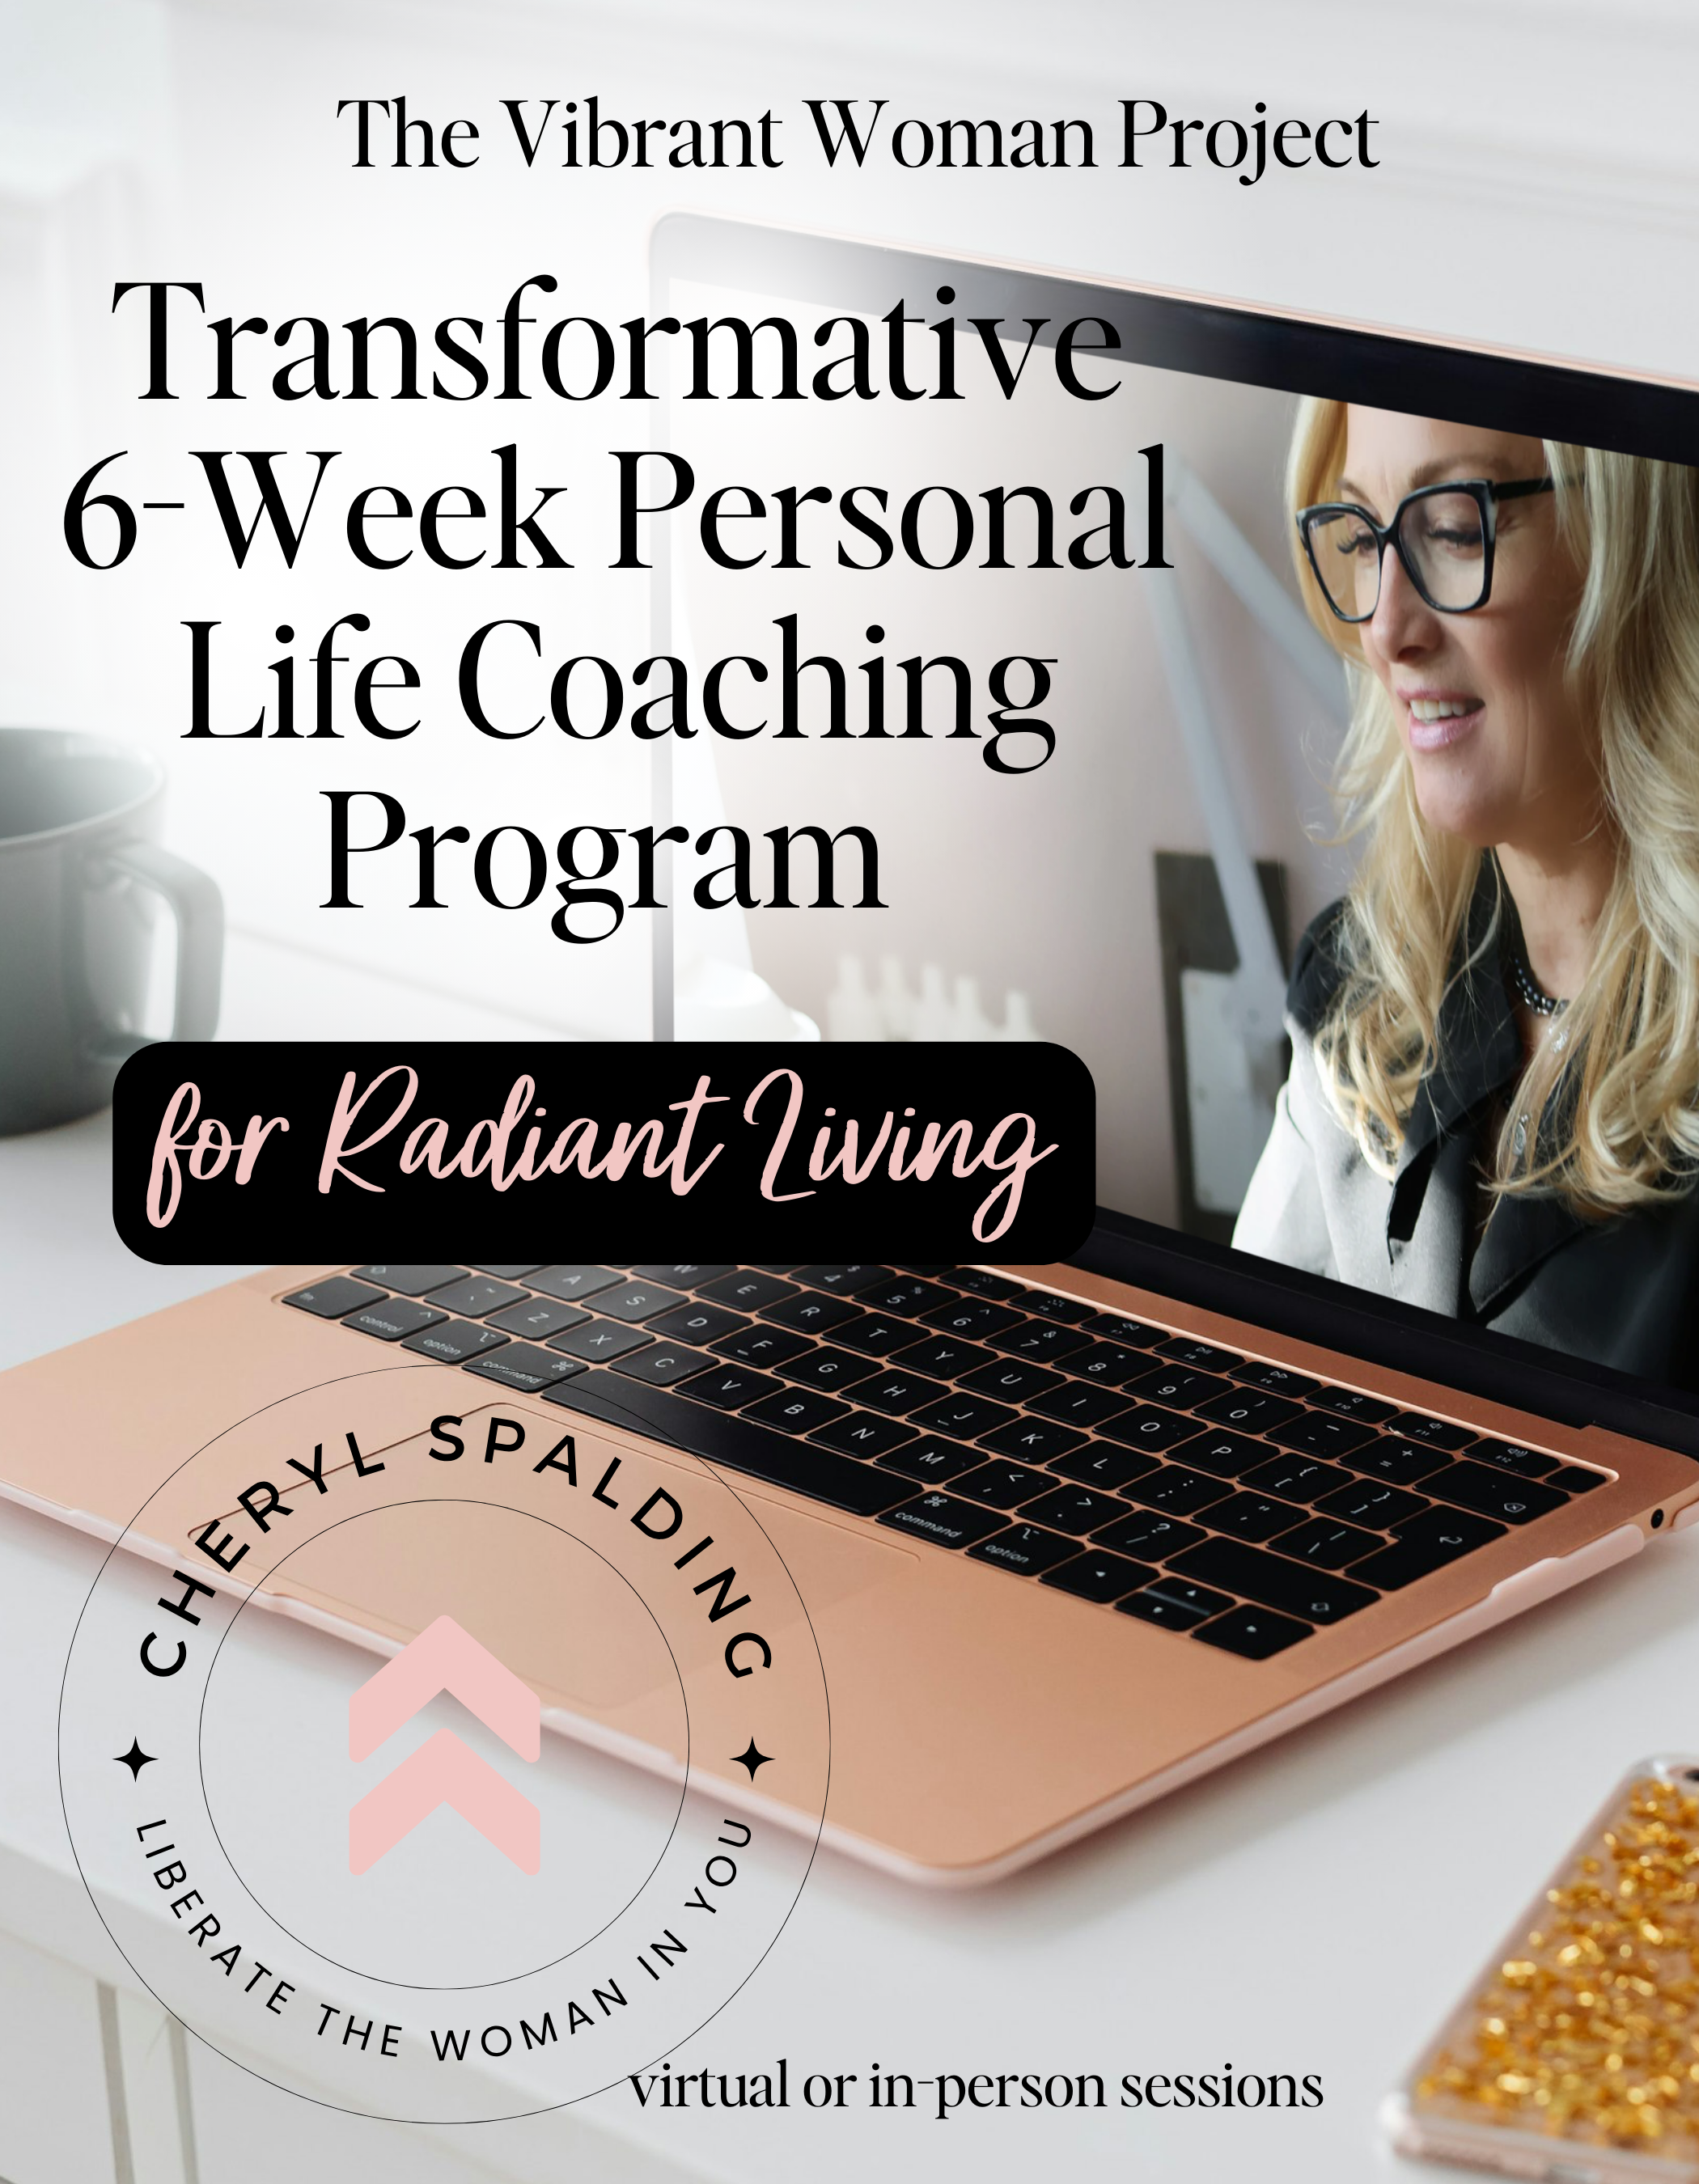 The Vibrant Woman Project: A Transformative 6-Week Personal Life Coaching Program for Radiant Living